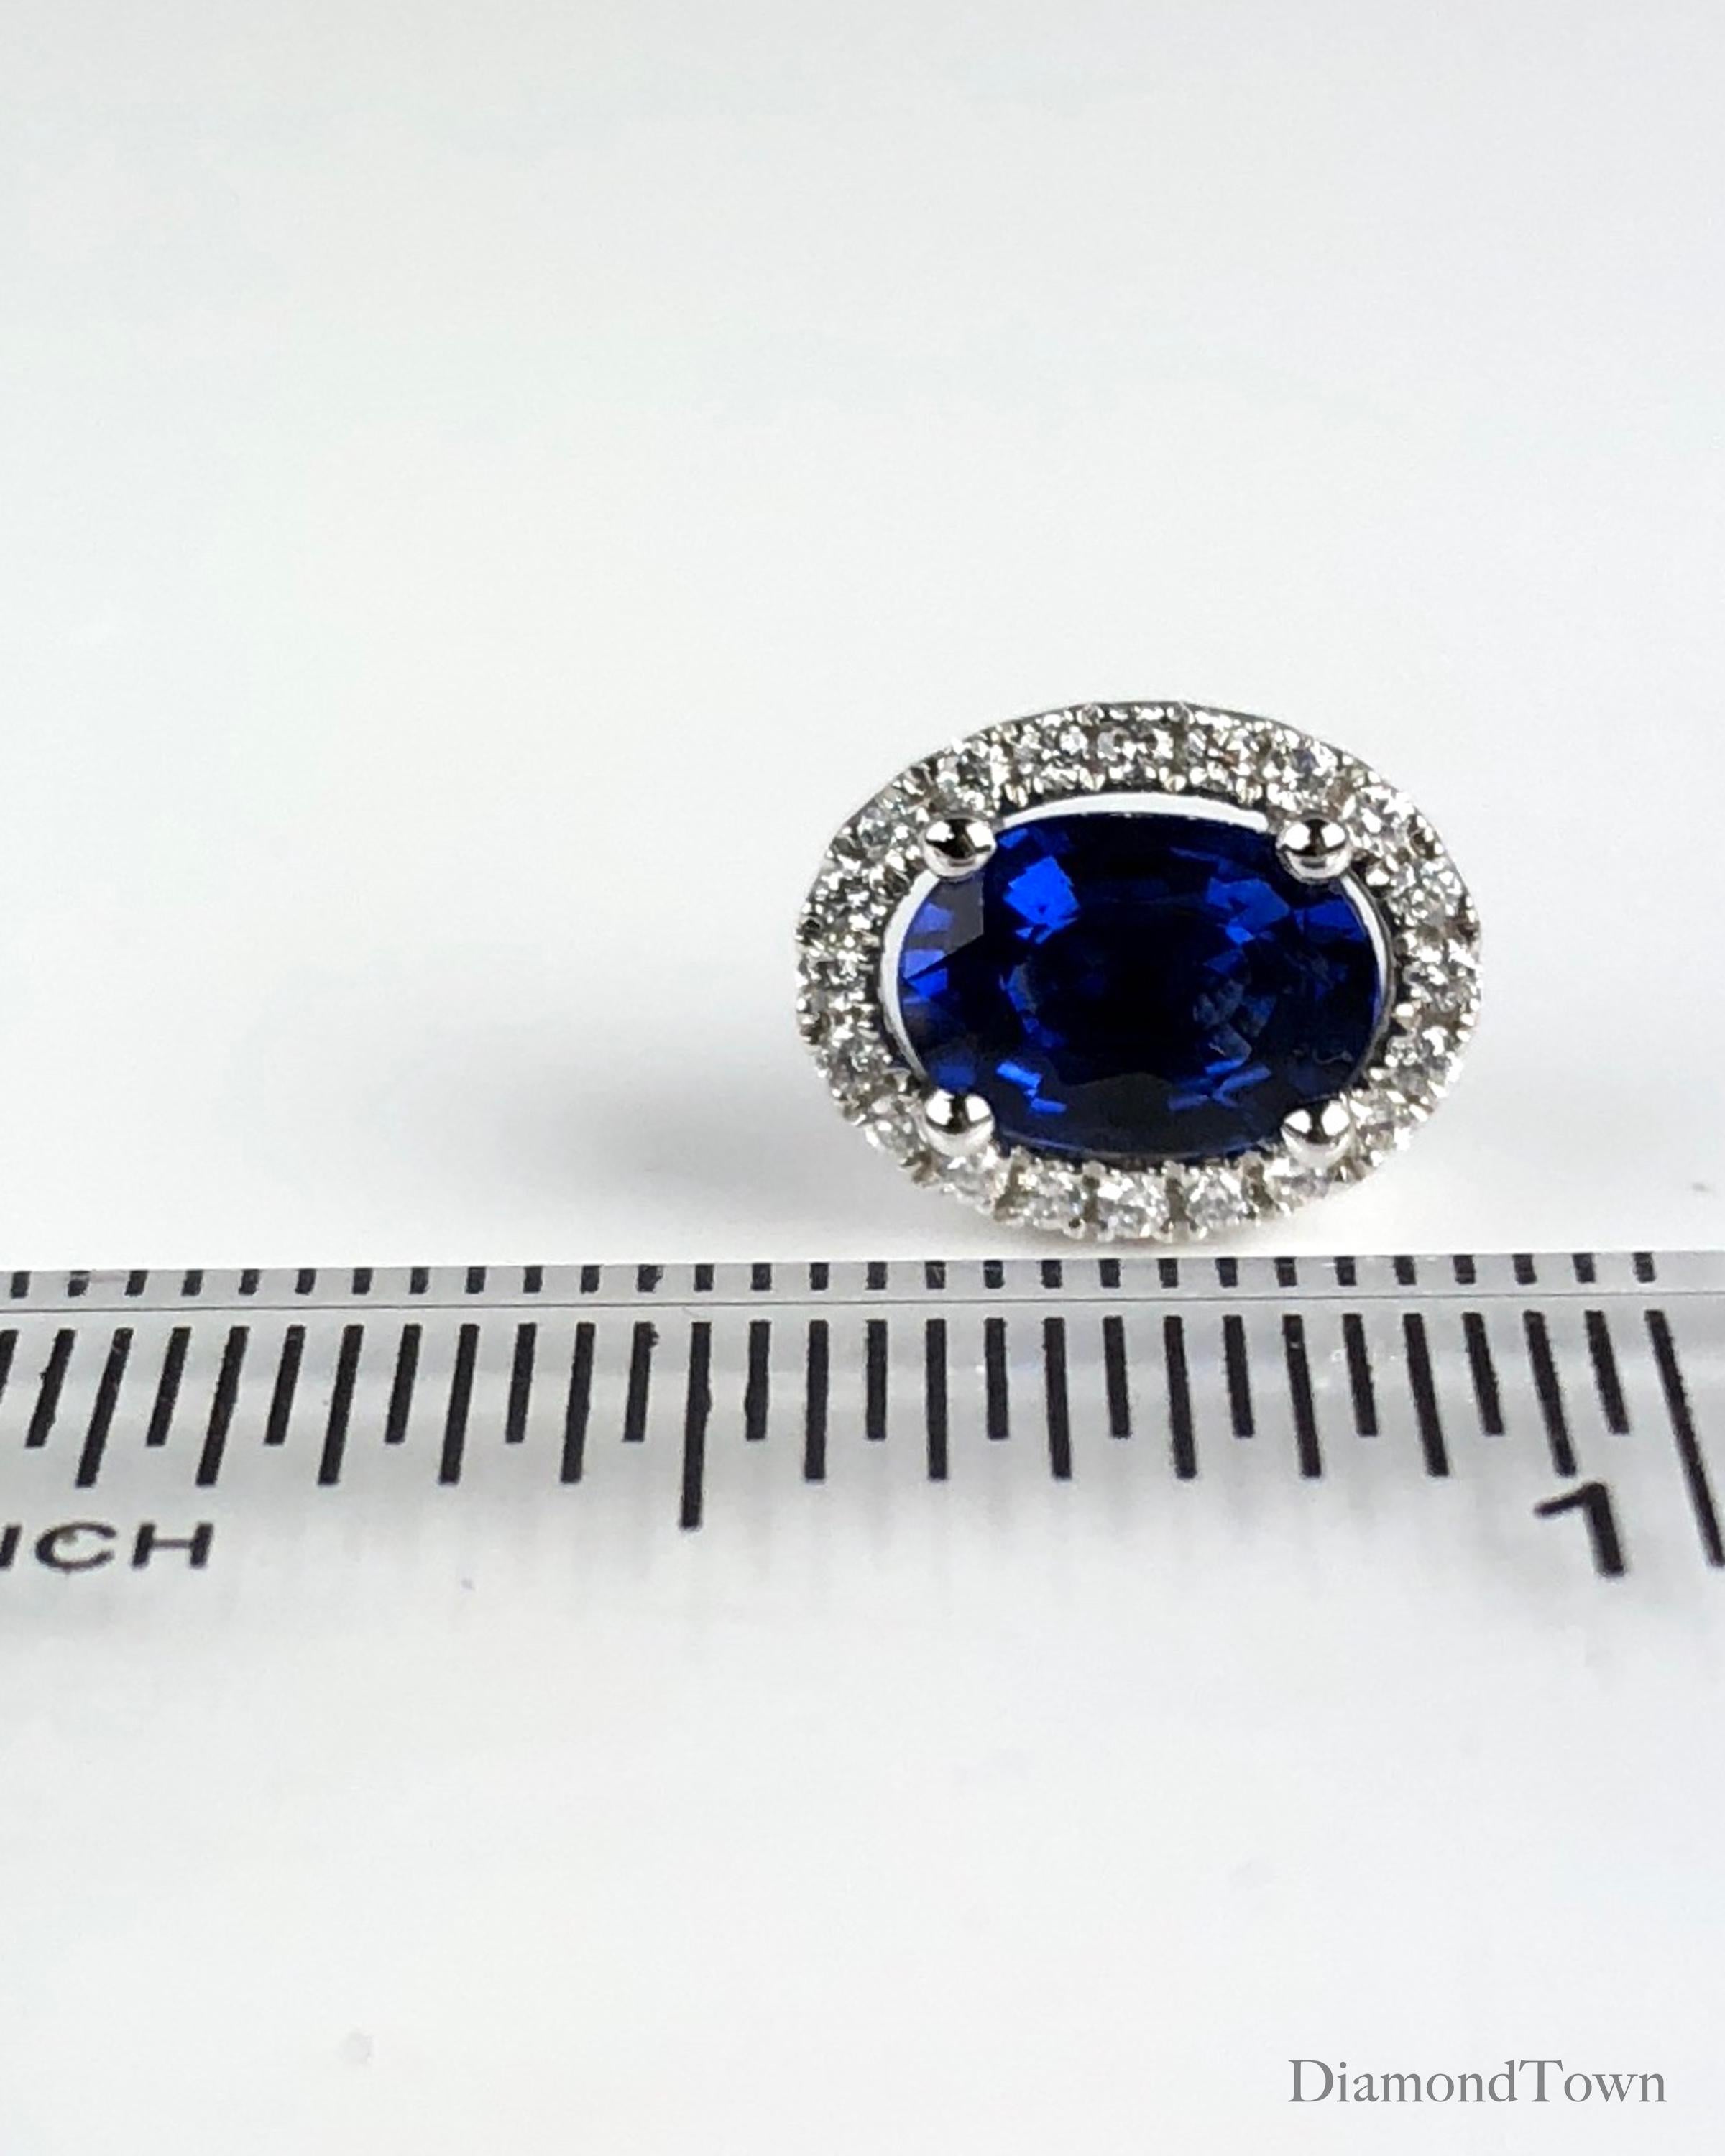 1.65 Carat Oval Cut Blue Sapphire Earrings with Diamond Halo in 18k White Gold 2